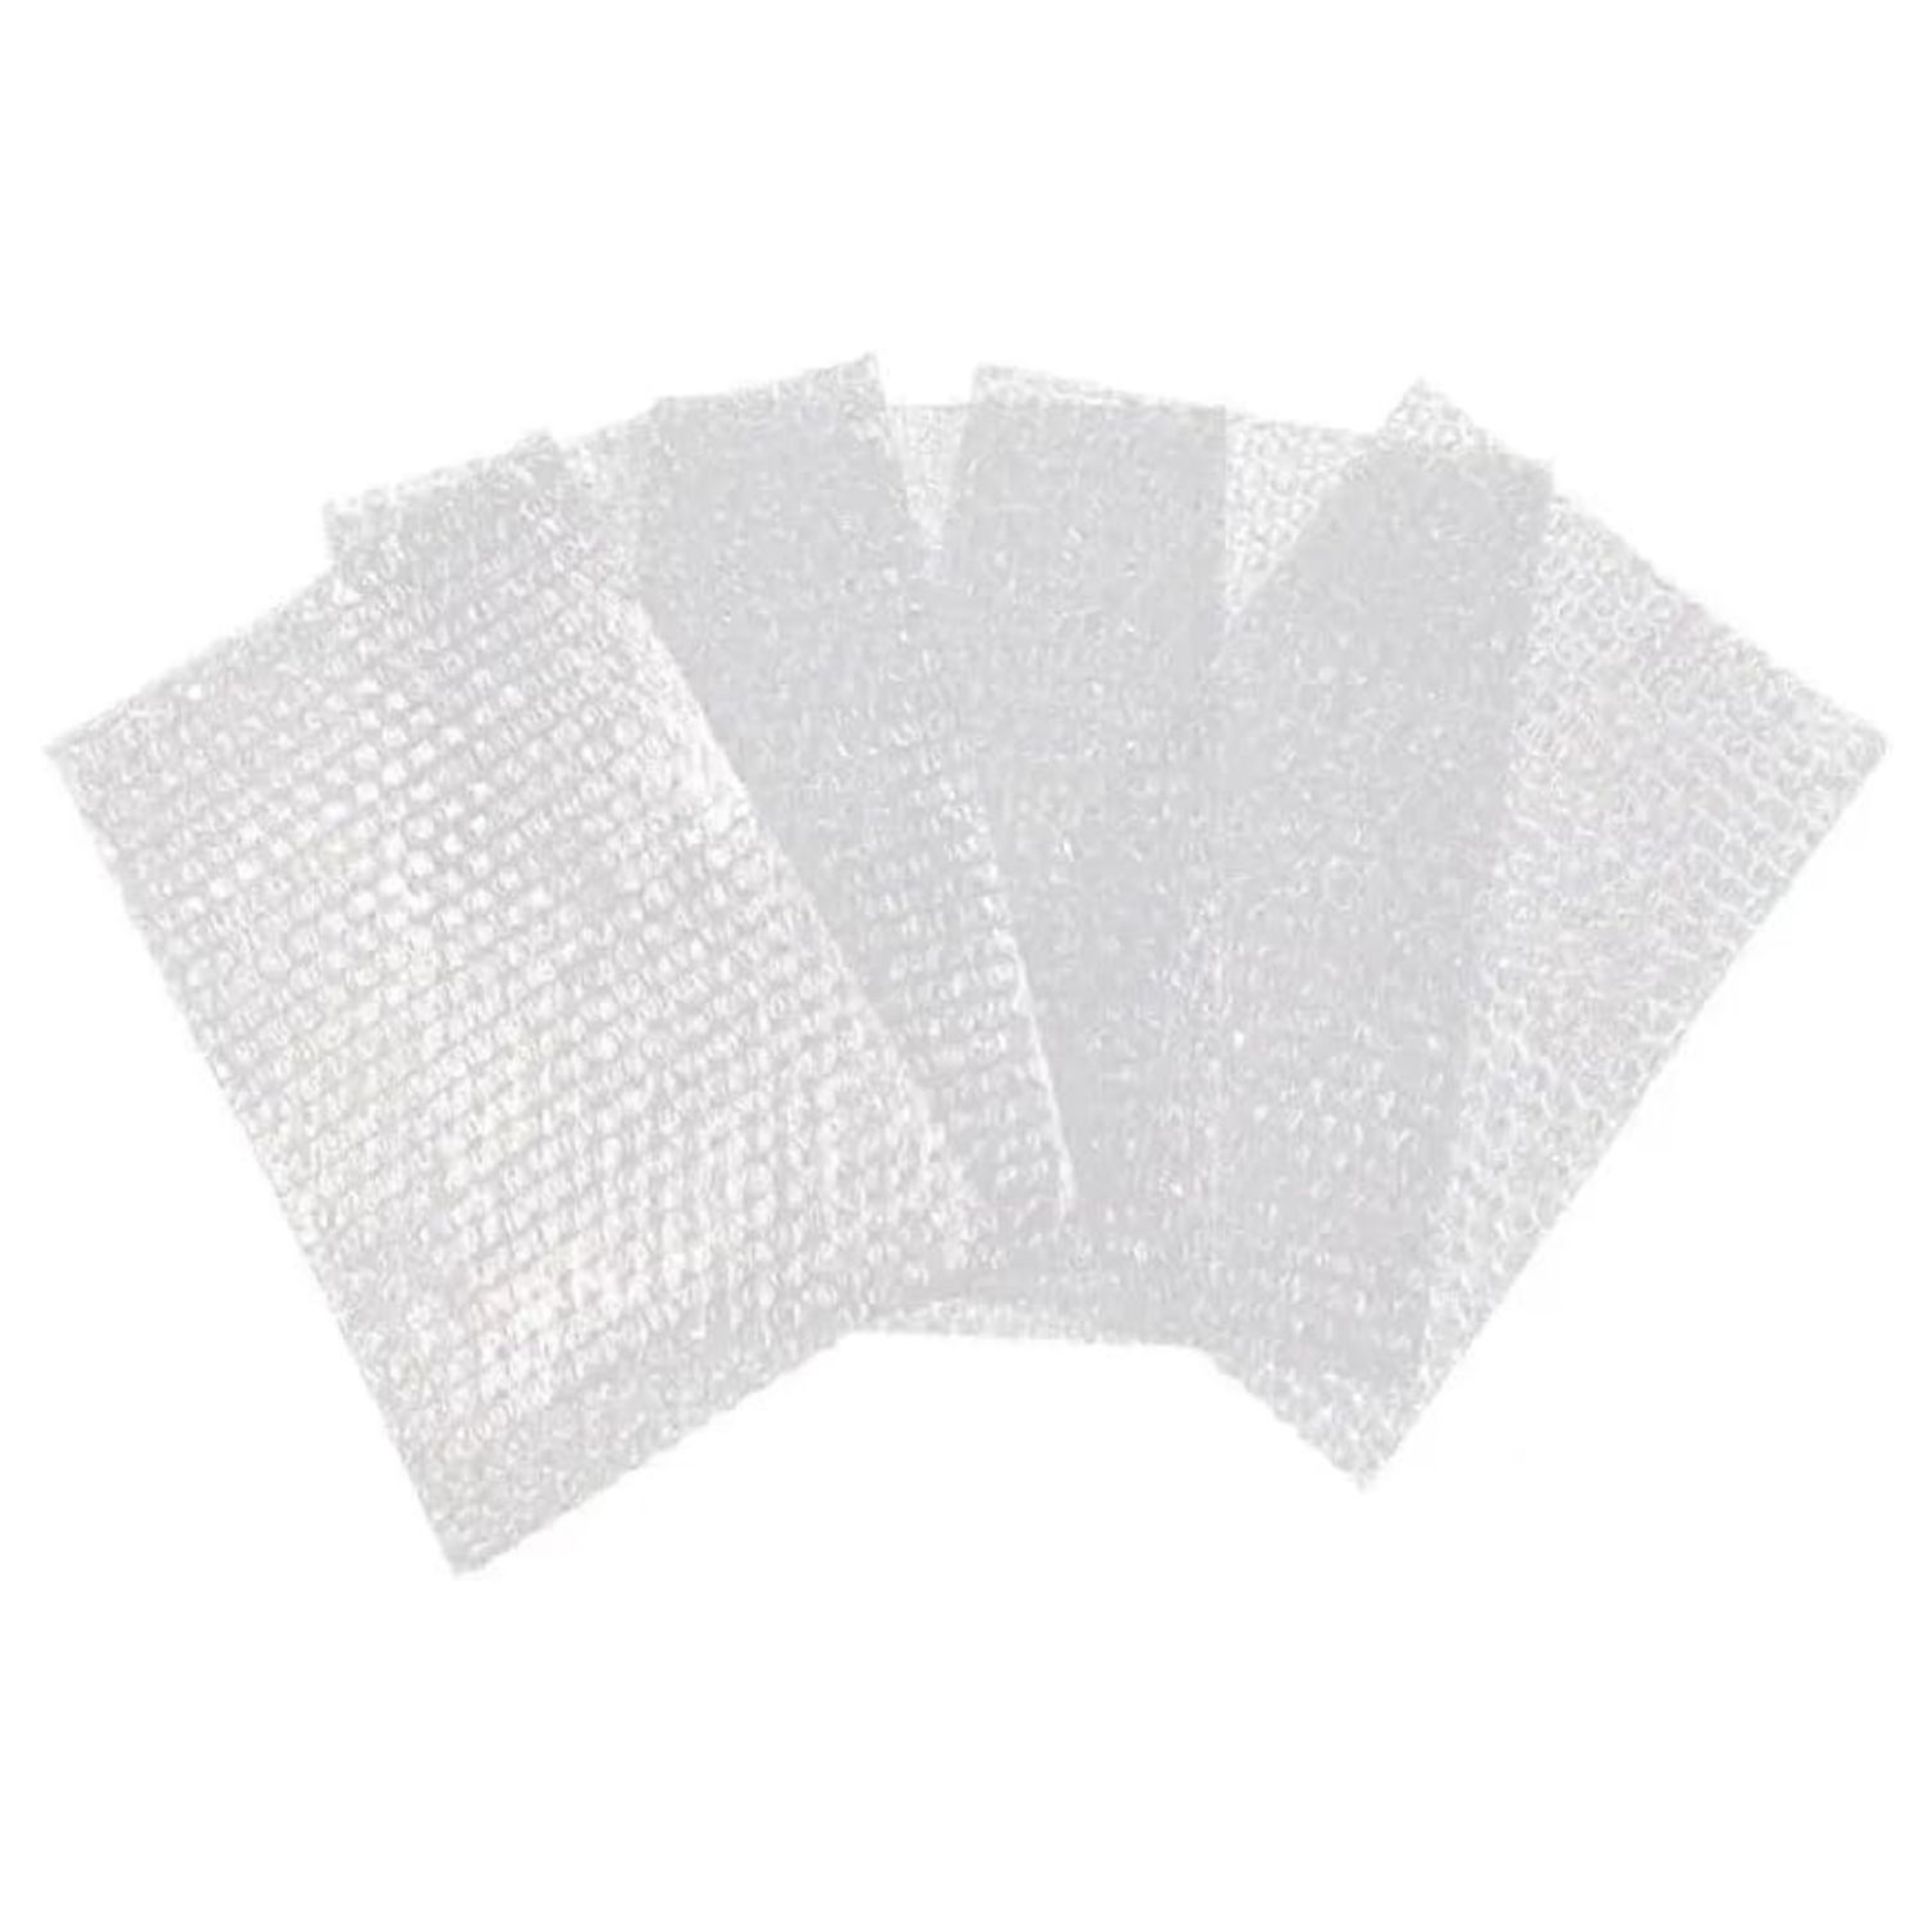 10 BOXES OF 100 PEEL AND SEAL BUBBLE WRAP PREMIUM CLEAR POUCH BAGS, 130X185MM - Bild 2 aus 4